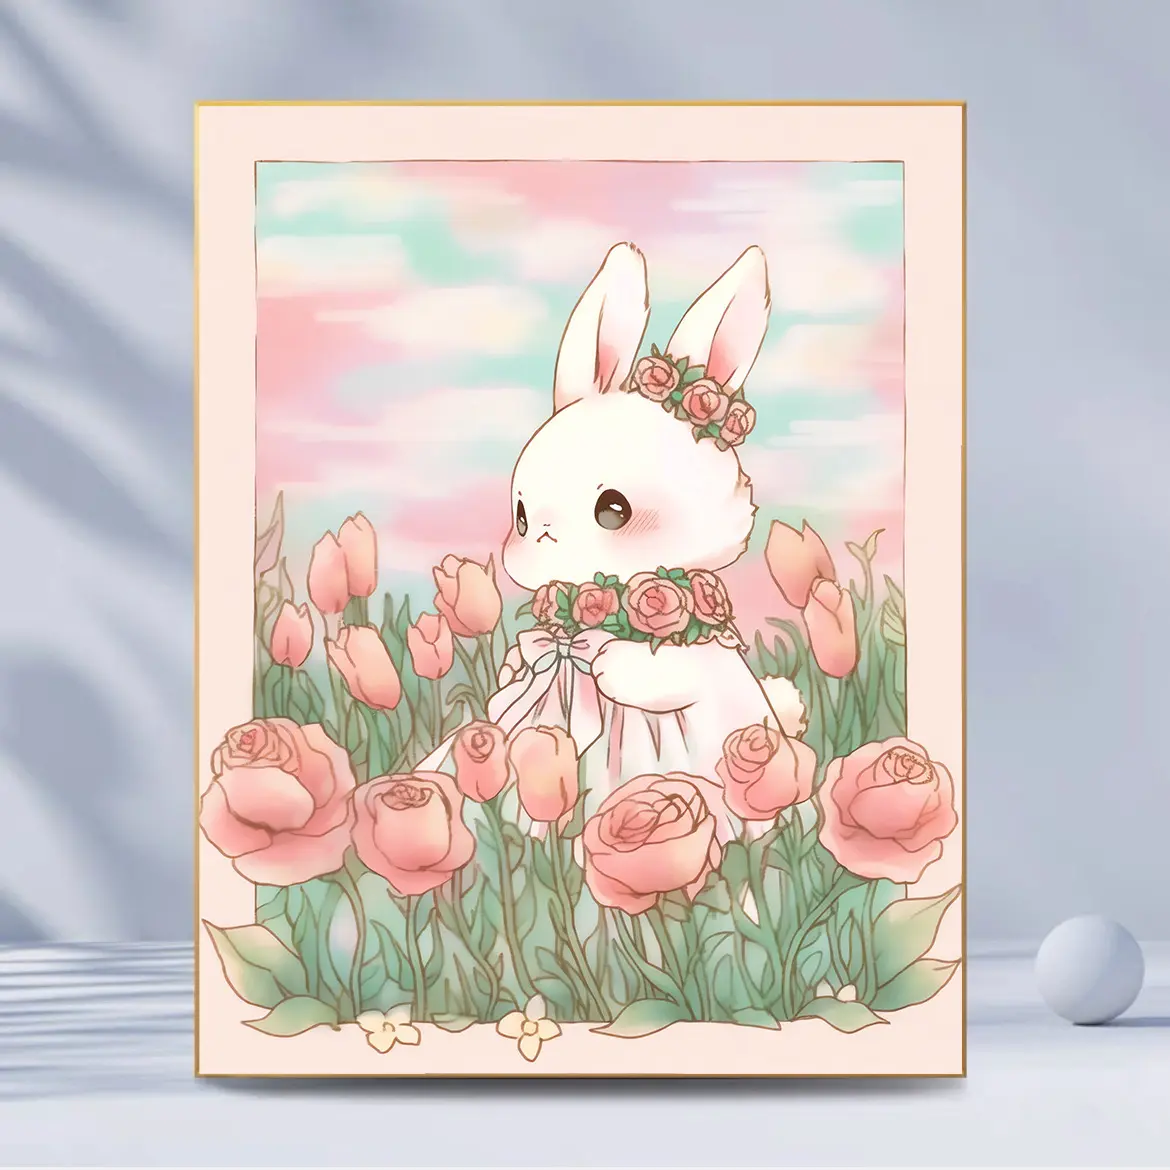 Factory Wholesale Cartoon Rabbit And Rose 40x50 Digital Oil Painting With Inner Frame Your Idea Can Be Customized